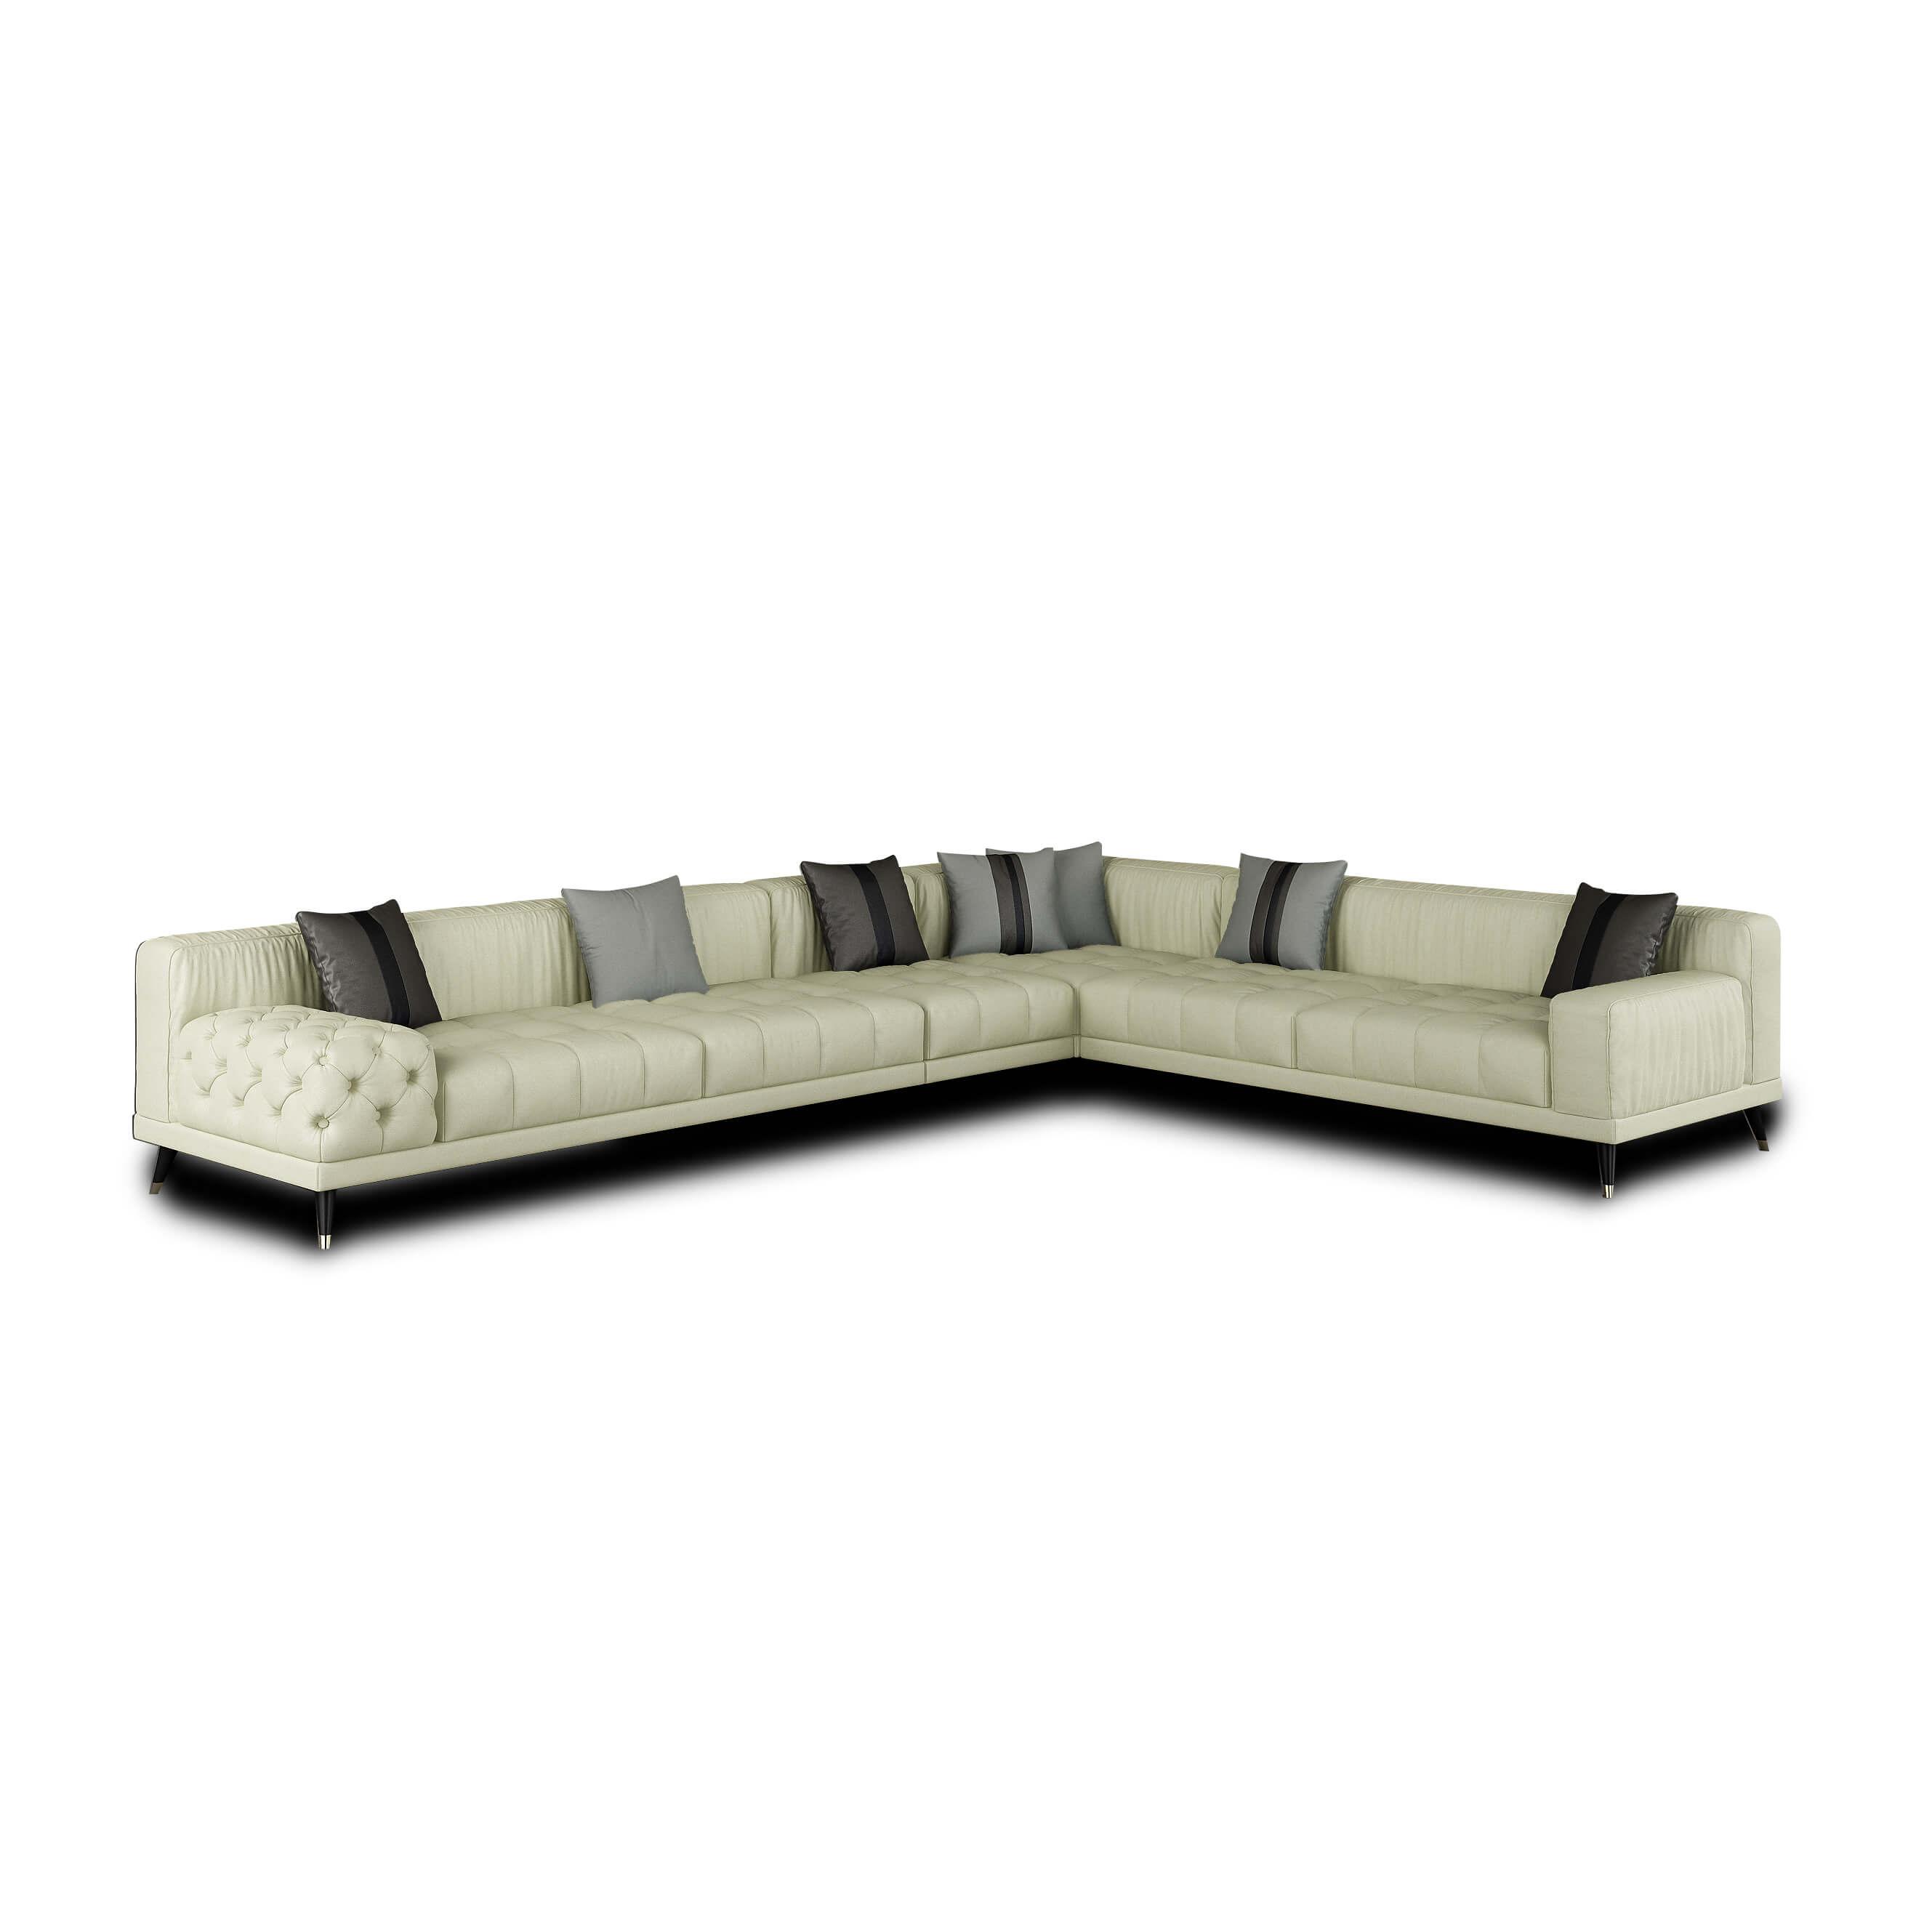 Modern Modular Sectional Sofa Outlander EF-88887-4PC in Off-White Leather